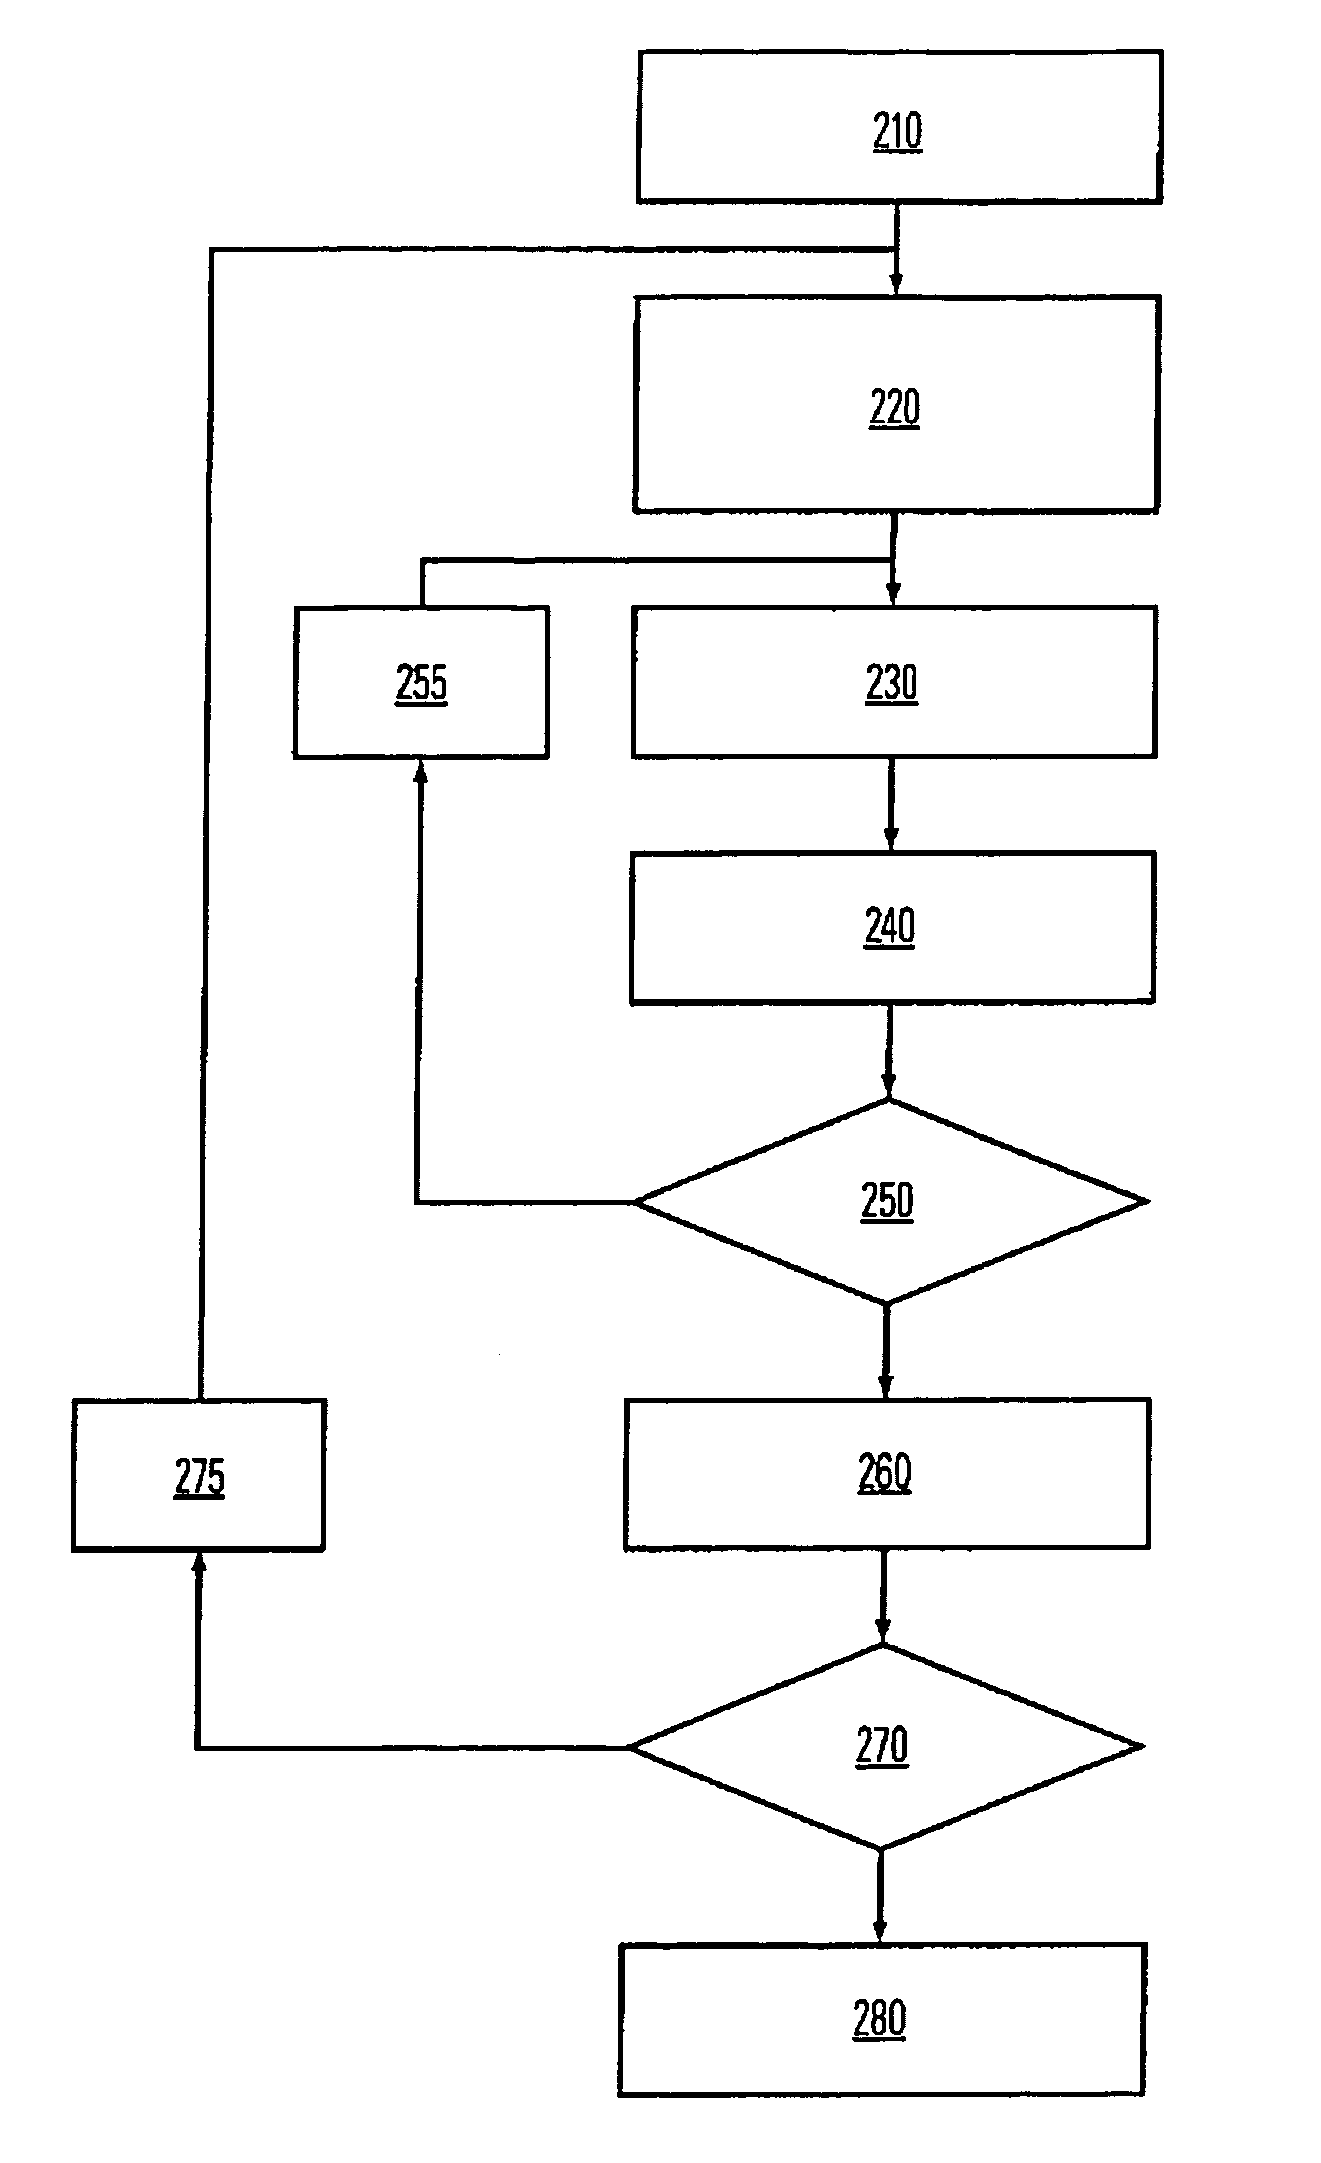 Method to detect a defective element